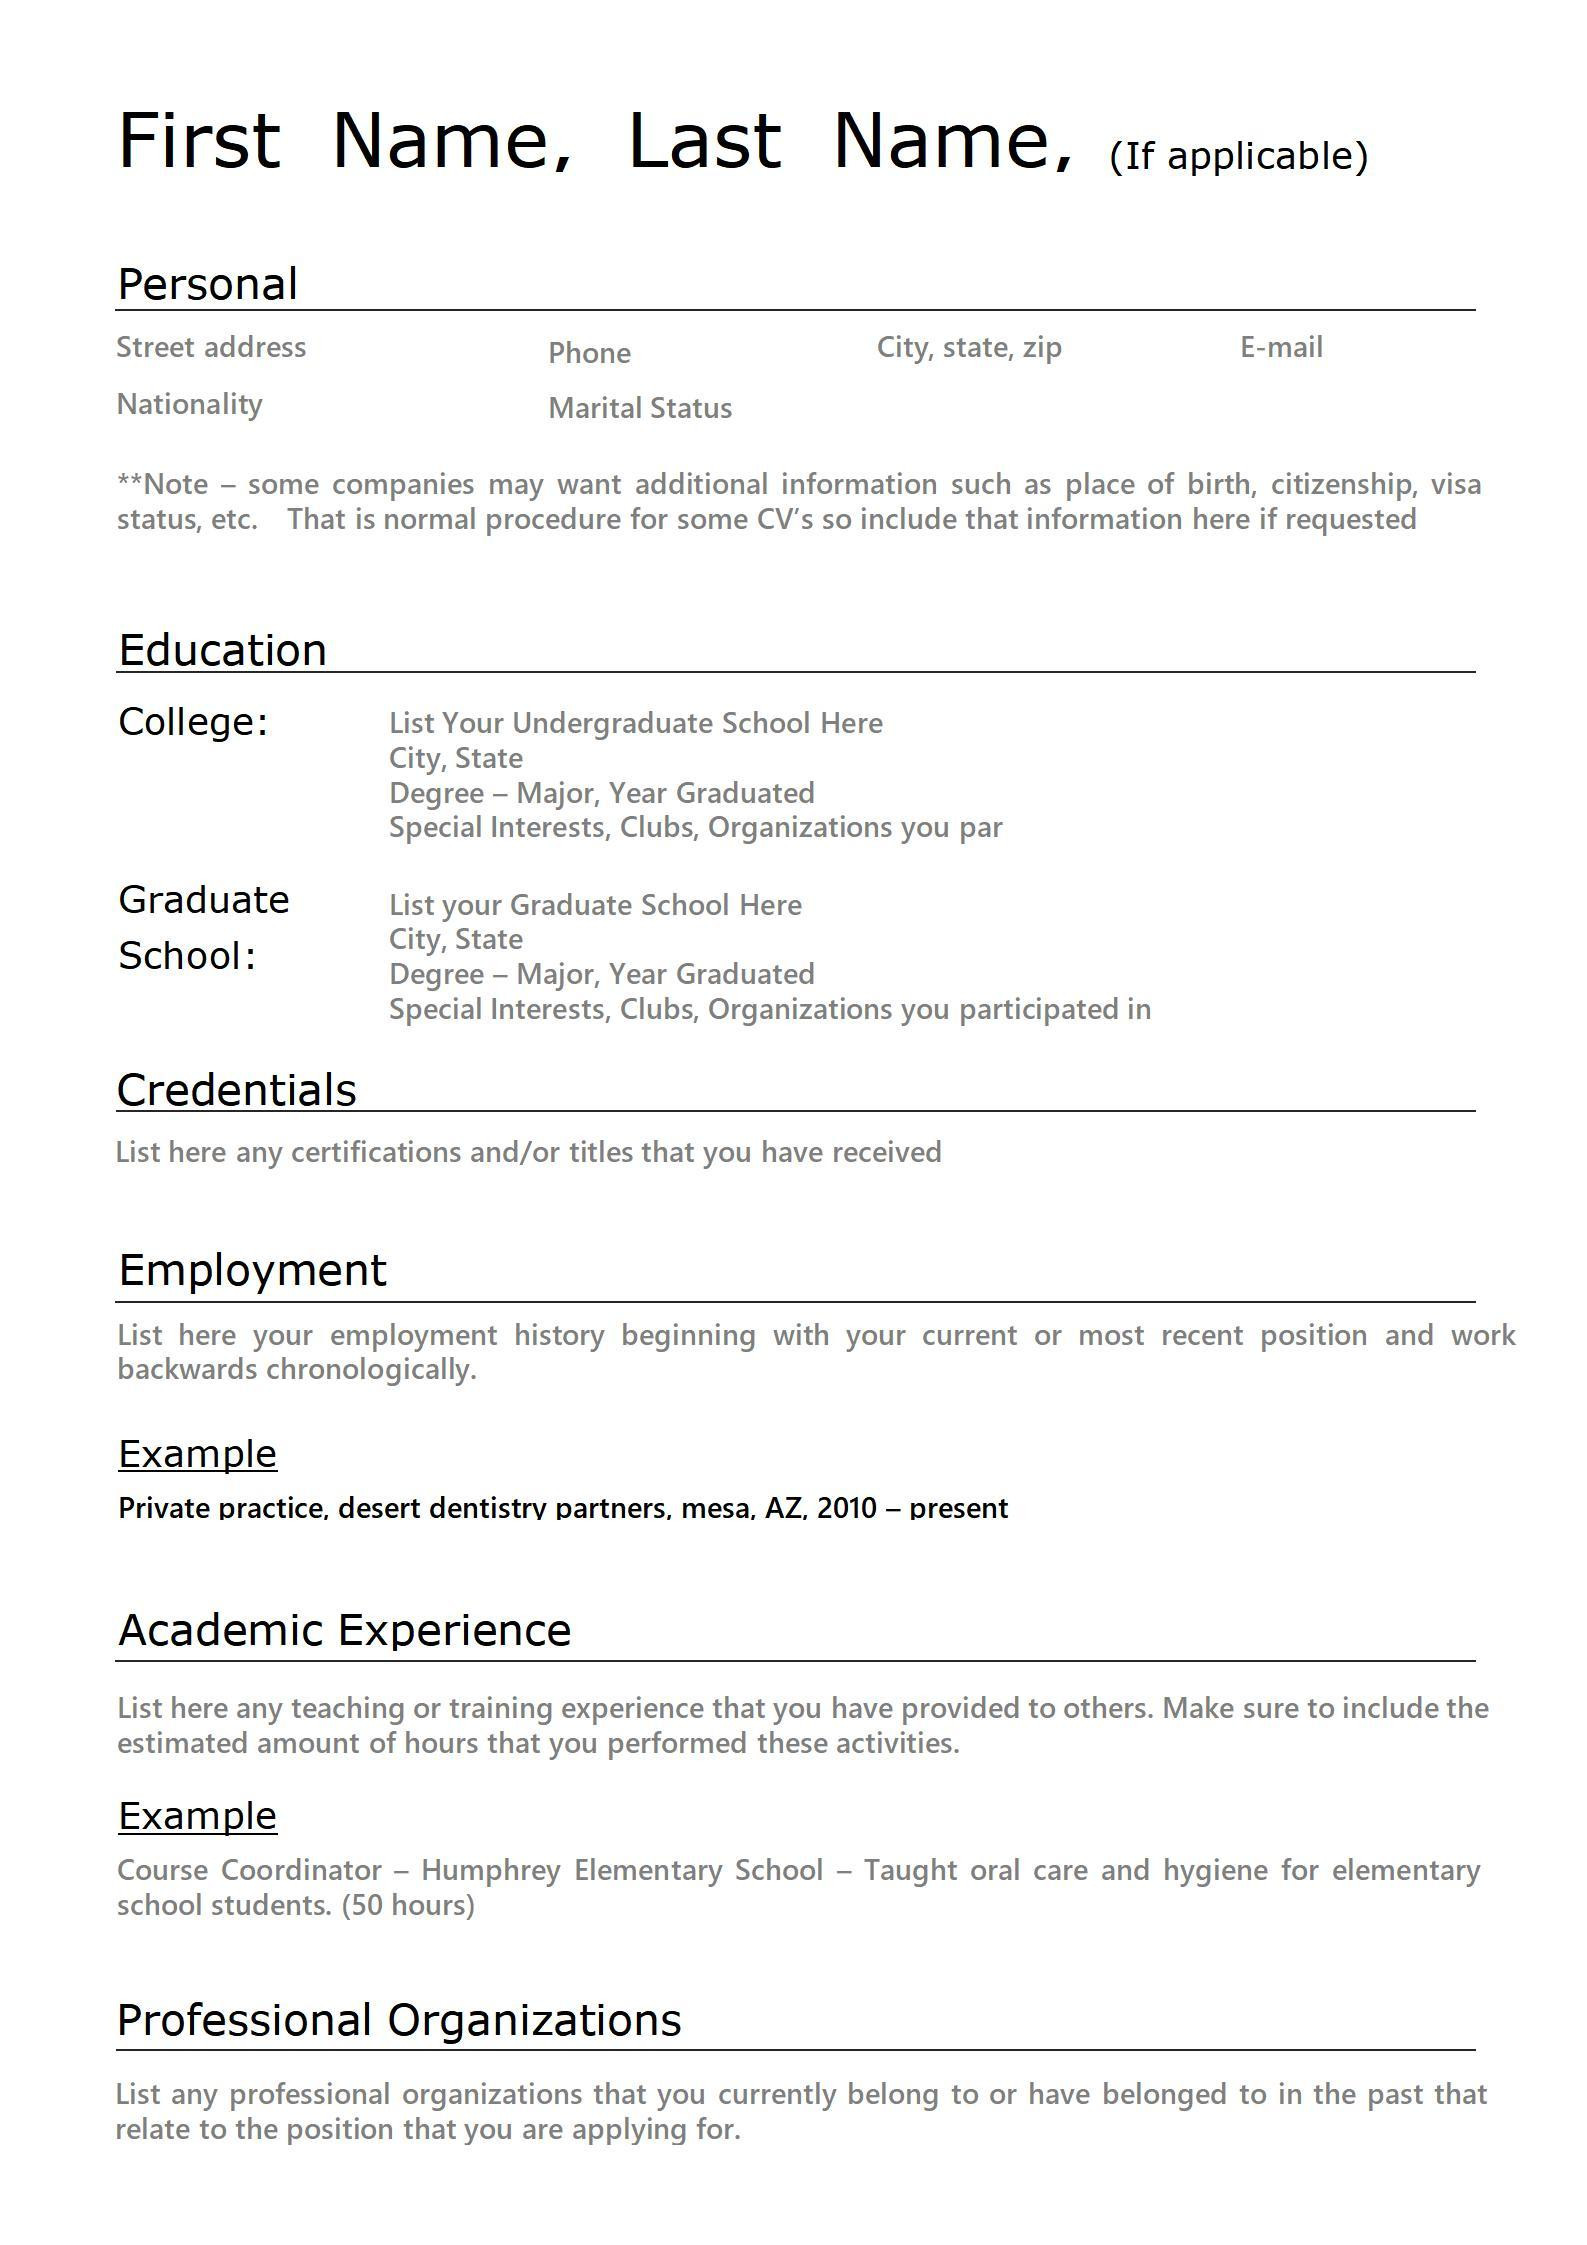 Sample Resume for School Job with No Experience First-time Resume with No Experience Samples Wps Office Academy